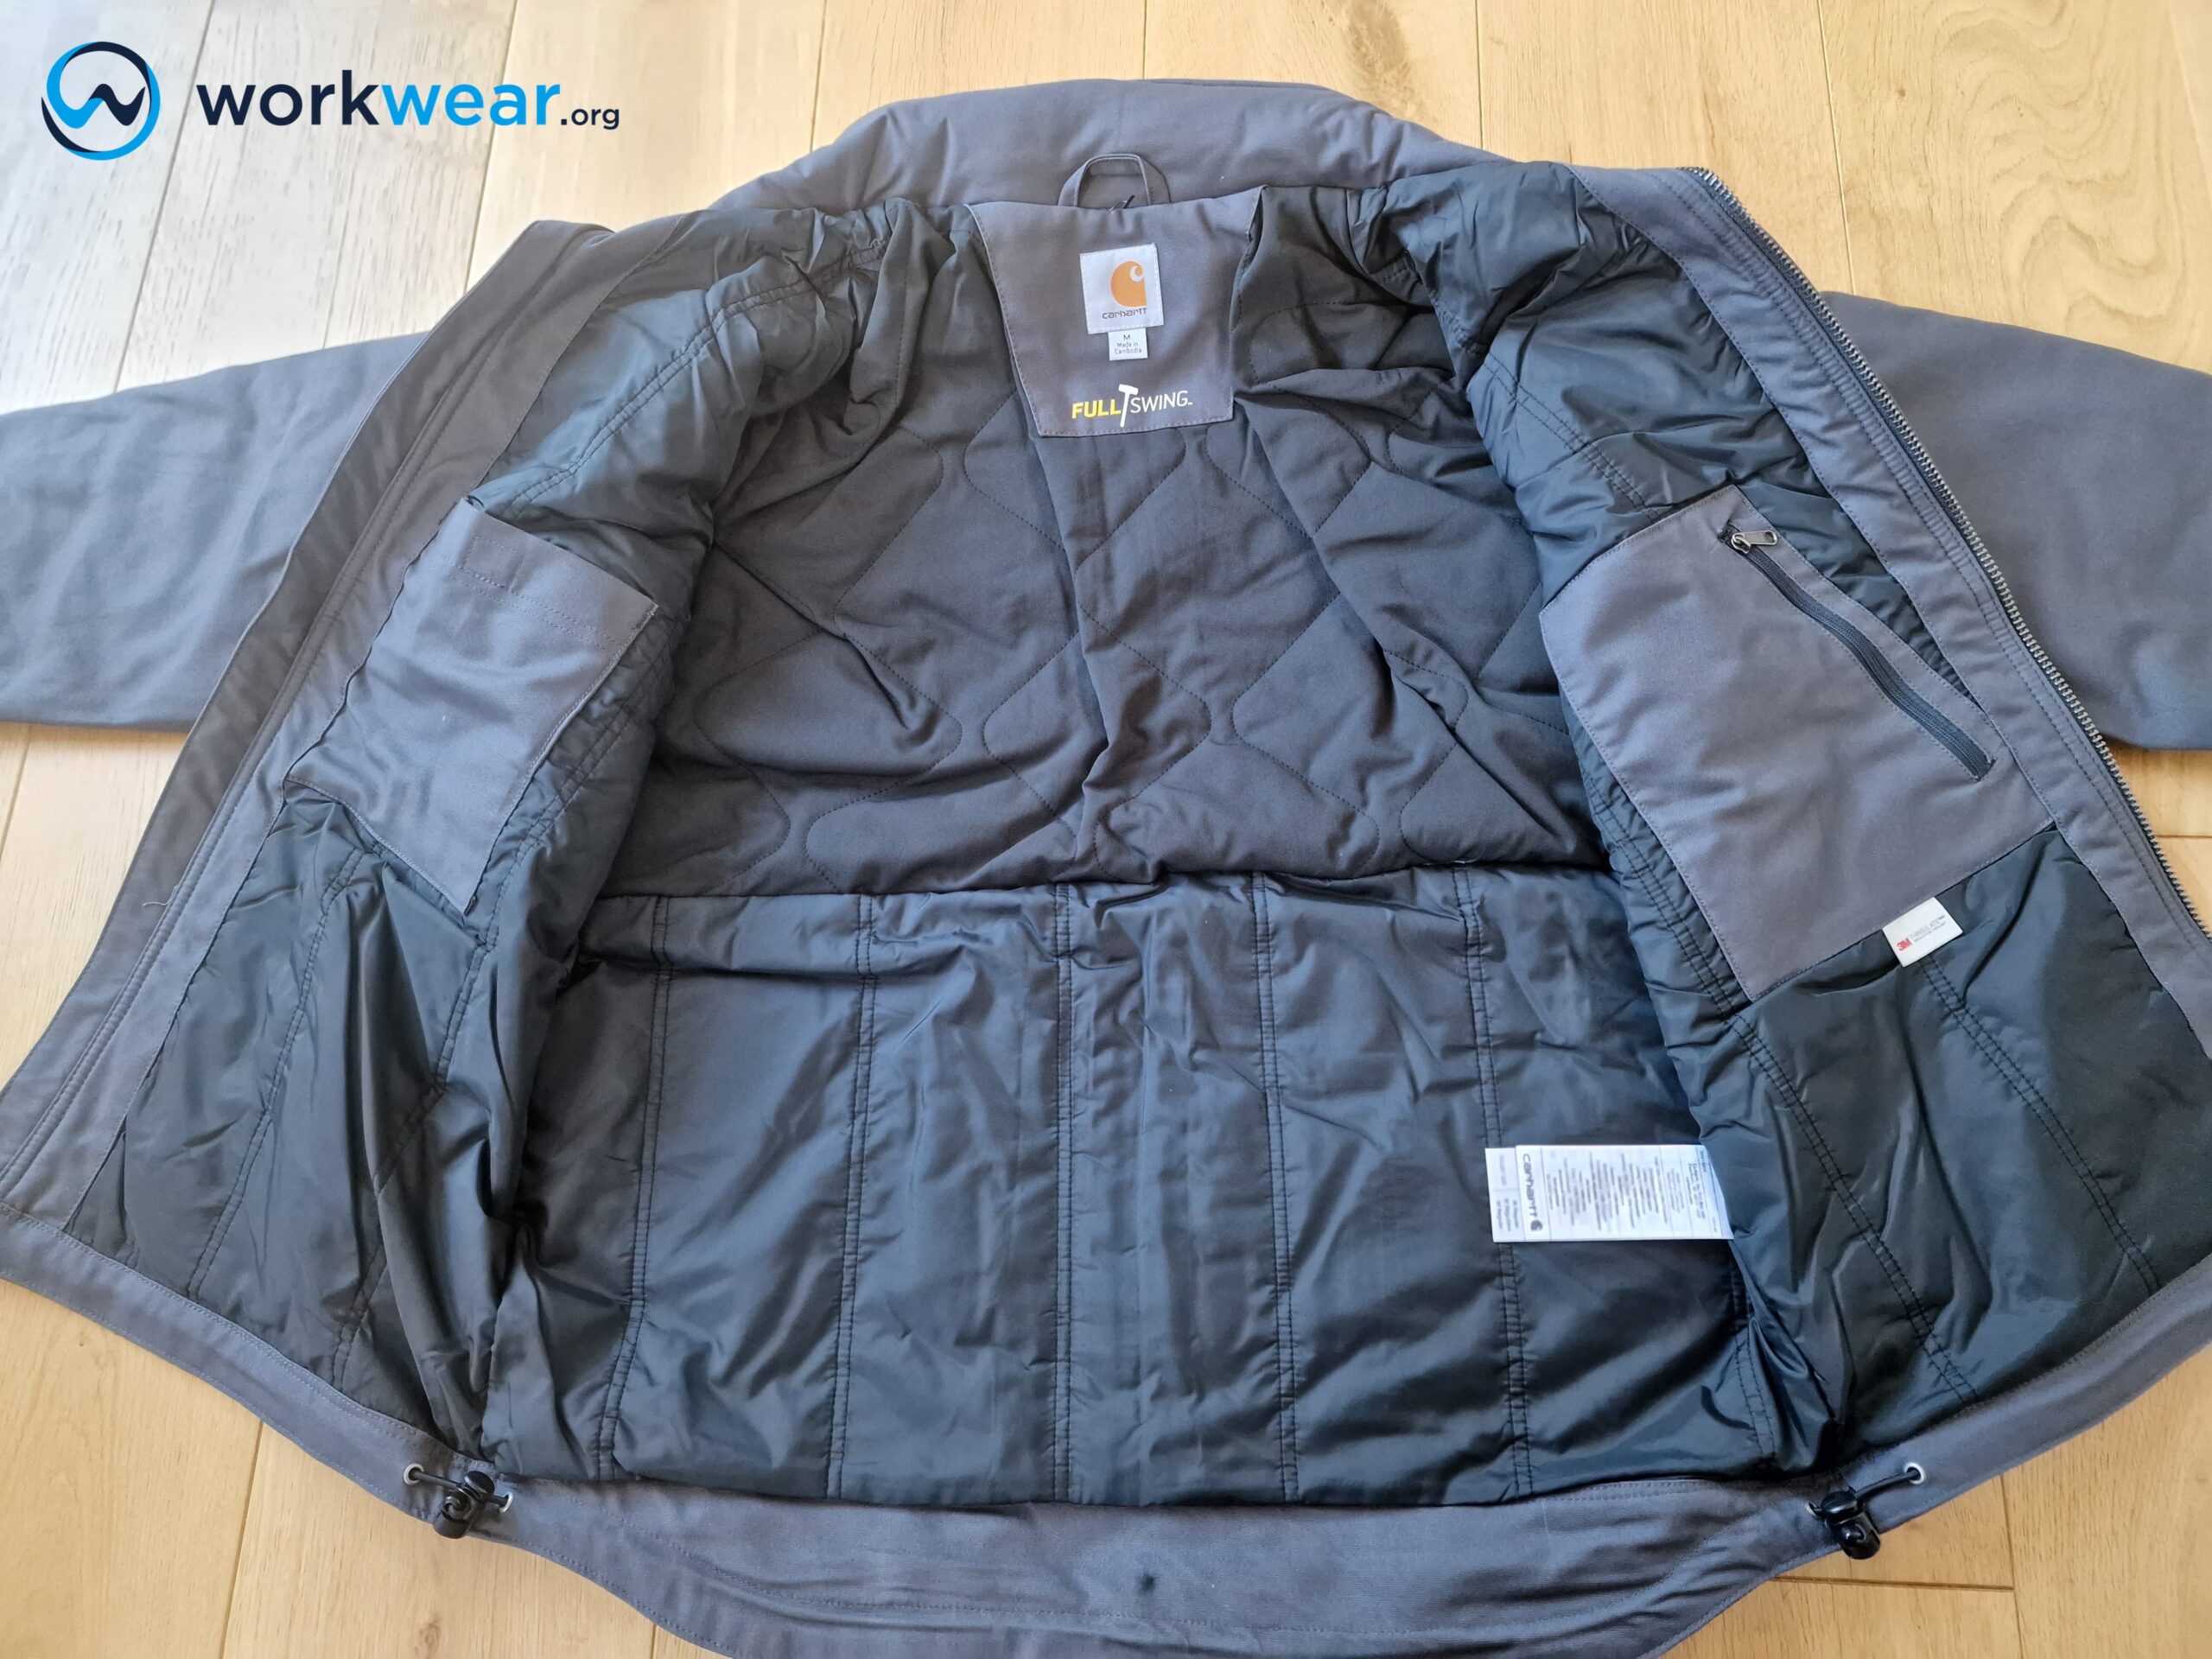 Key features of quality work jackets